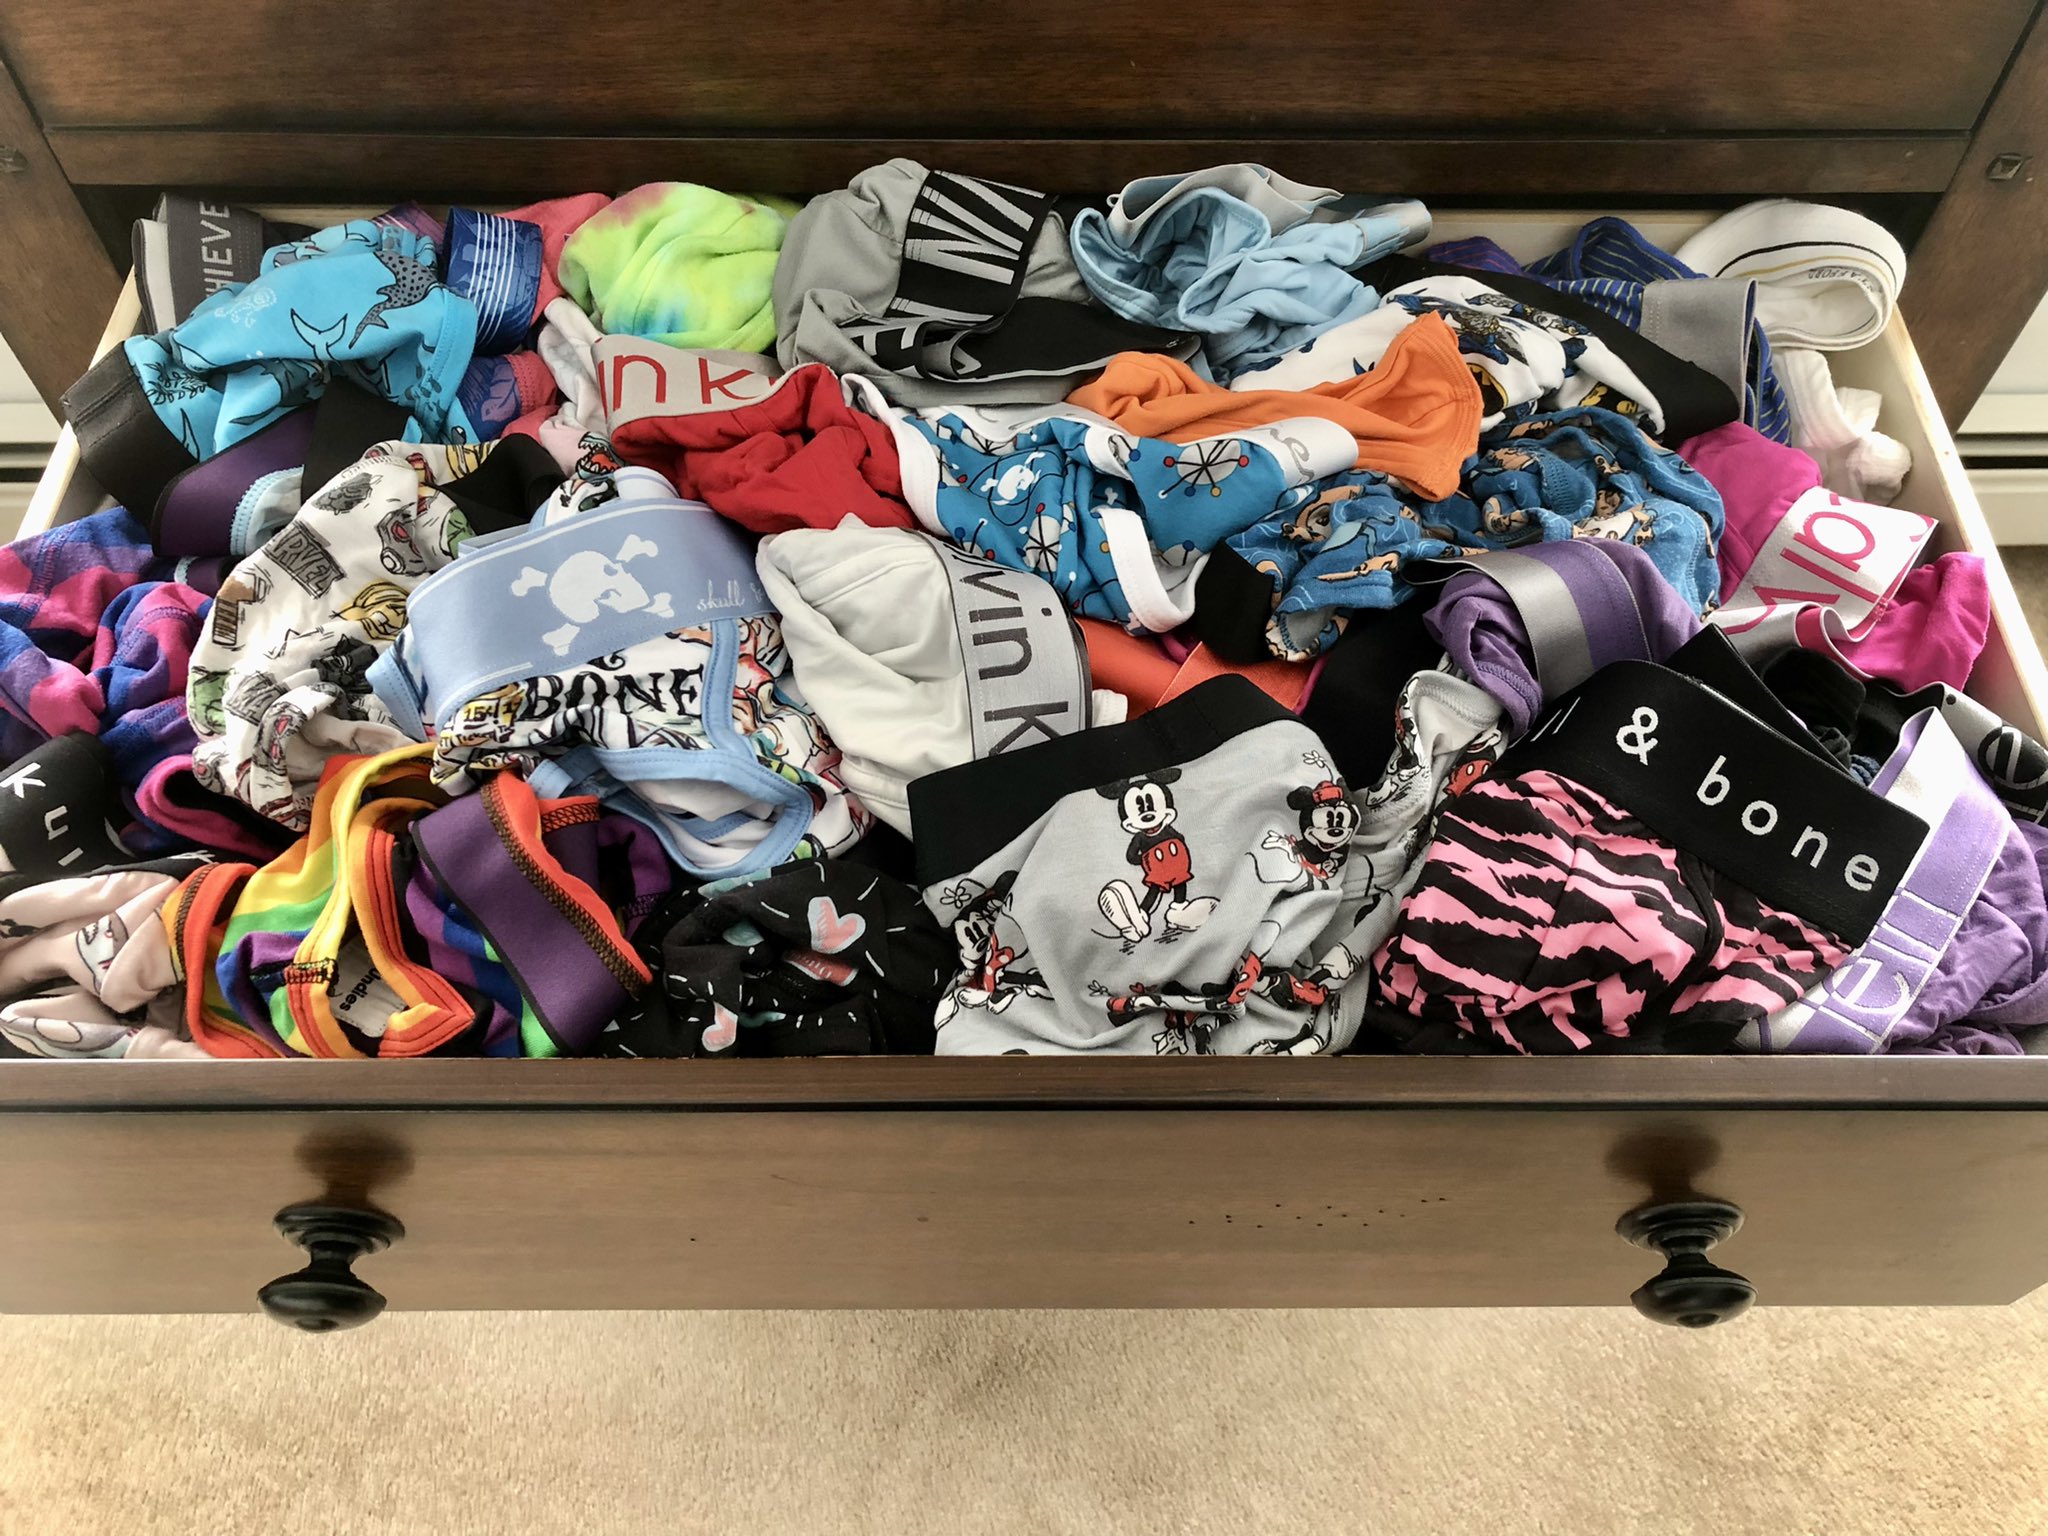 Underweareview1 on X: Who else is joining the party? Just post a pic of  your underwear drawer and use the hashtag #underweardrawerparty / X